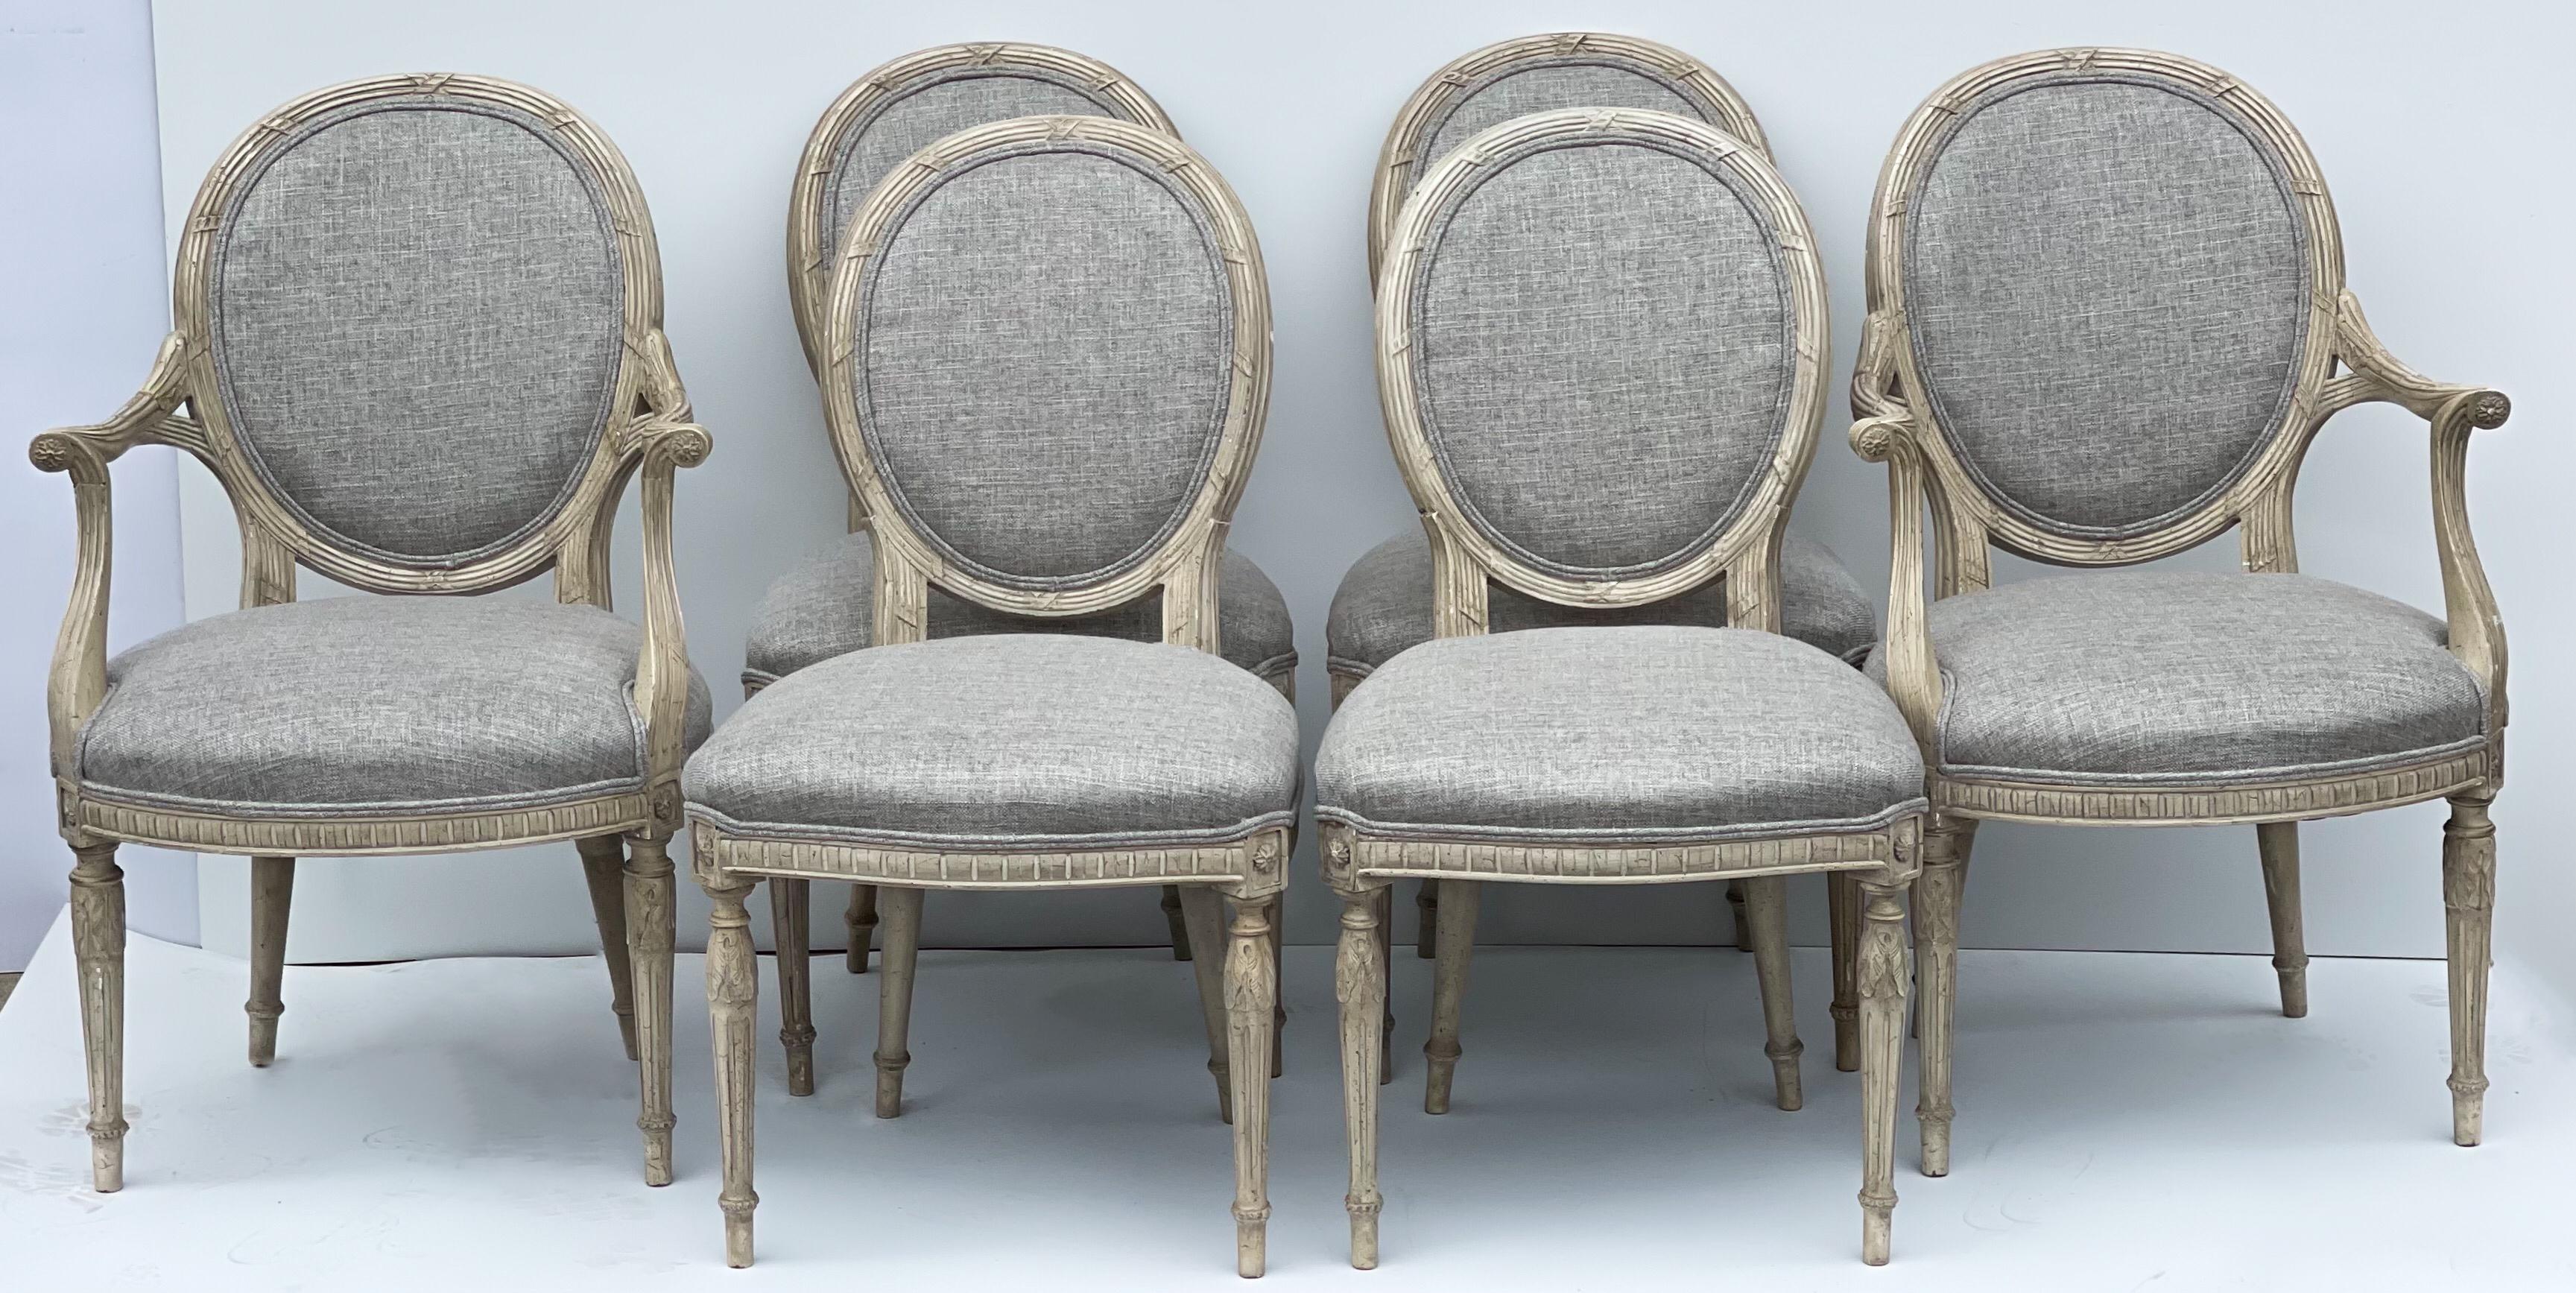 1950s Regency Style Carved Dining Chairs by Beacon Hill, S/6 6